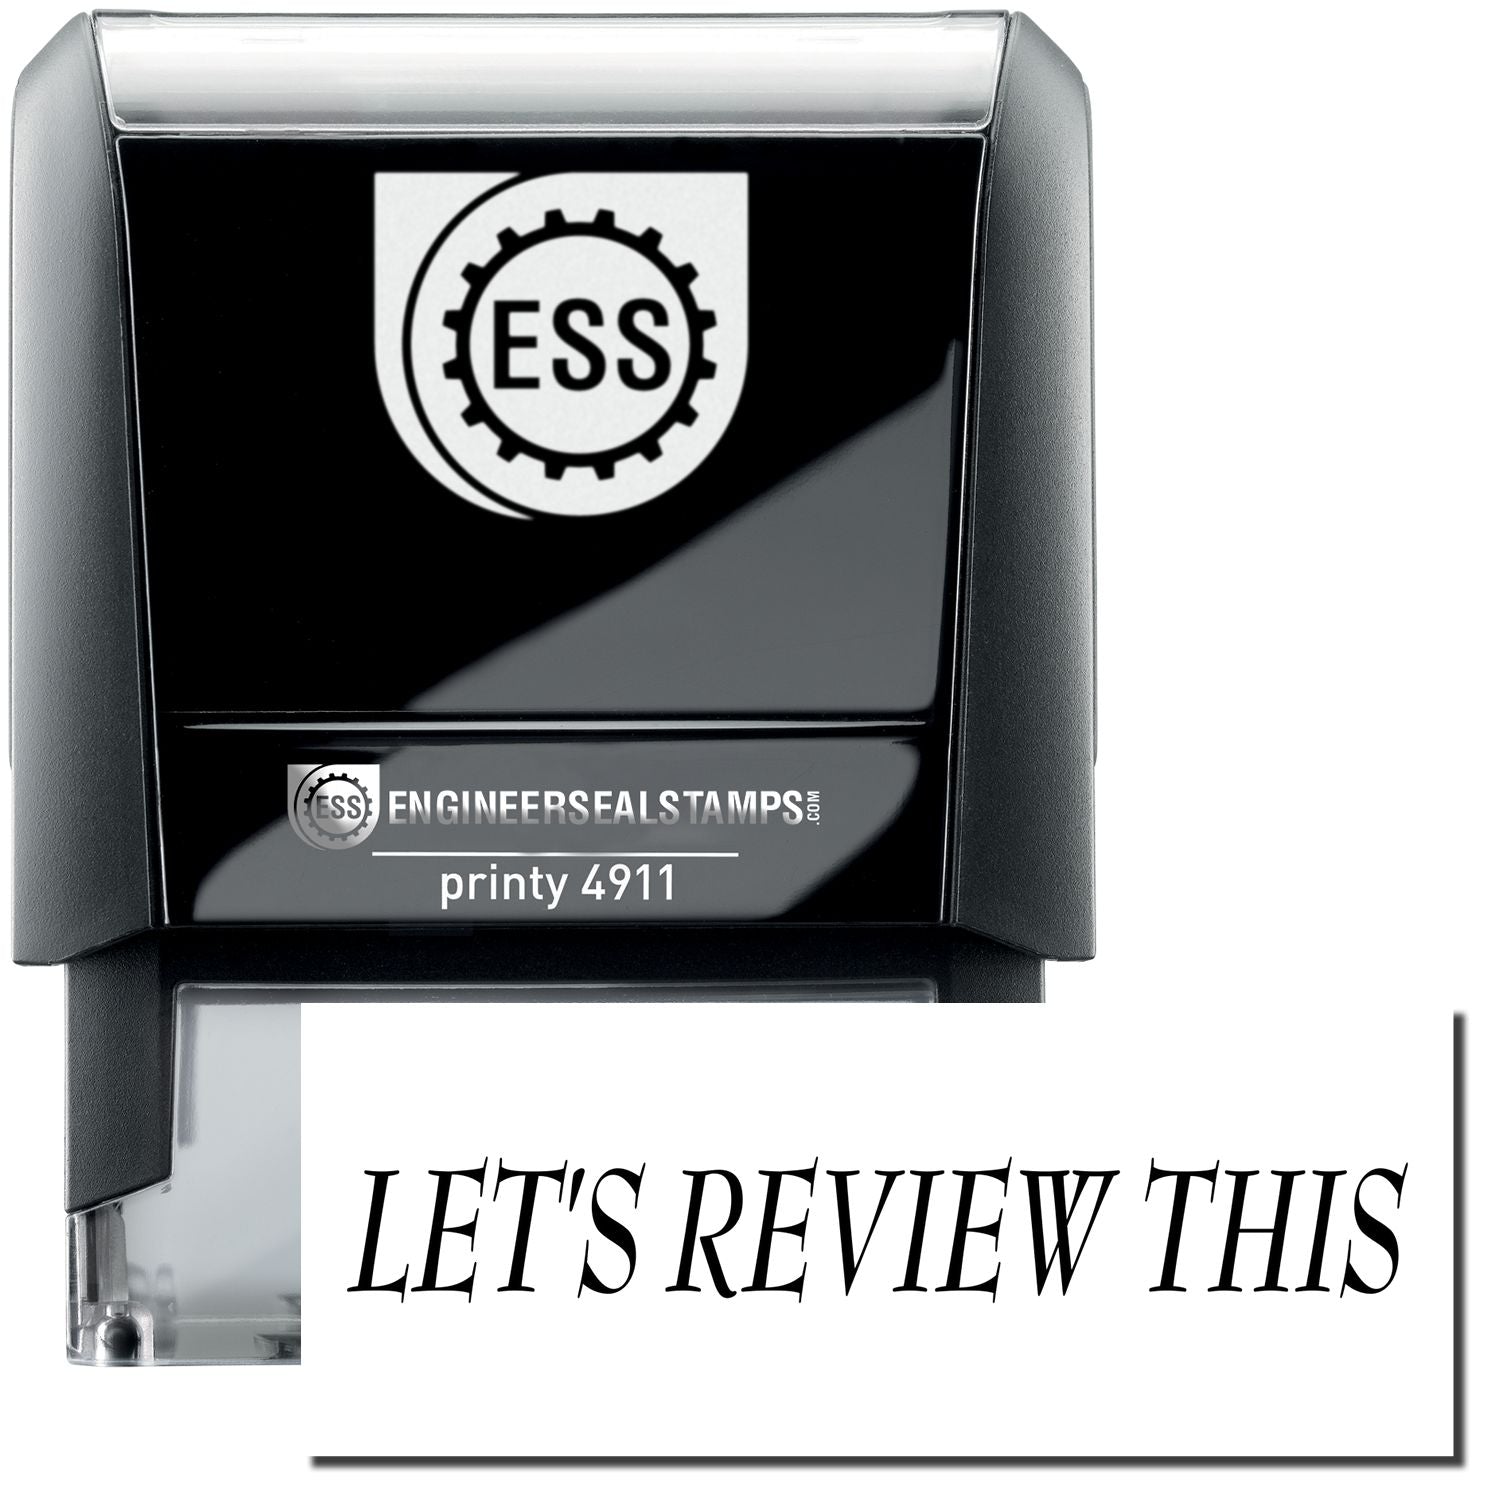 A self-inking stamp with a stamped image showing how the text "LET'S REVIEW THIS" is displayed after stamping.